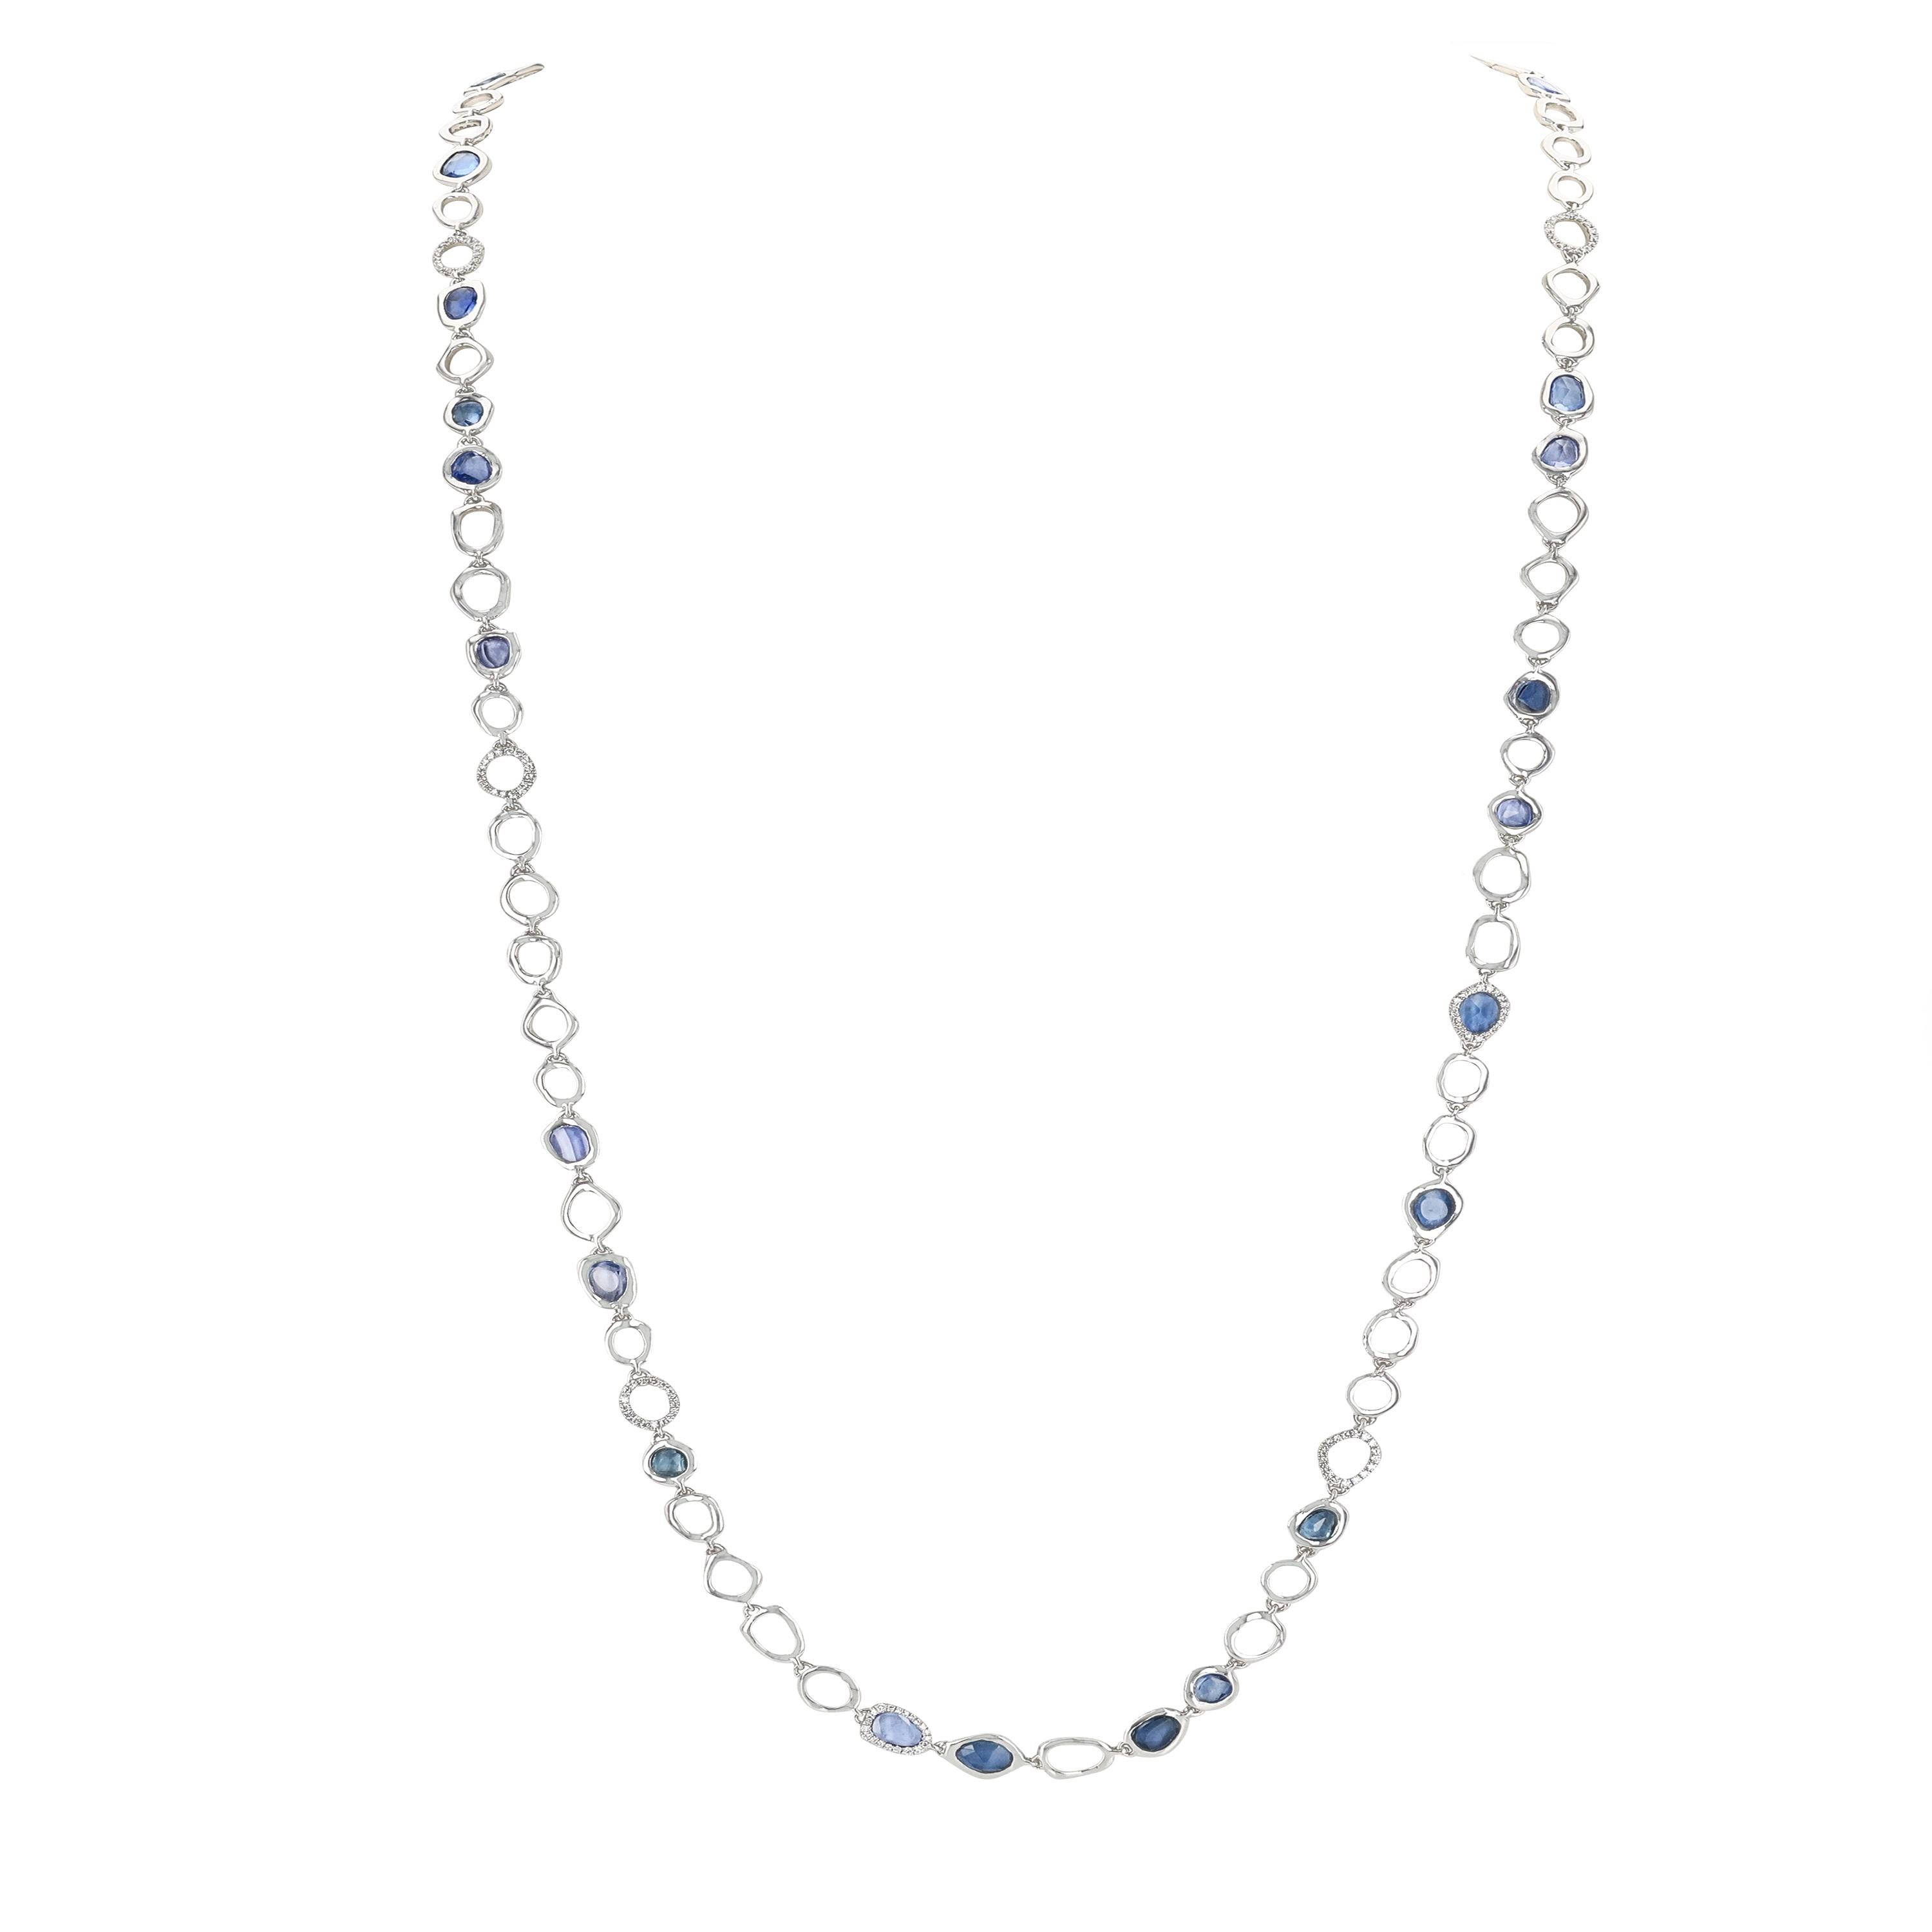 Perfectly balanced with blue sapphires and white gold, this white gold long chain is a stylish design that is playful yet utterly opulent. A celebration of diamonds is woven together to create this stunning and completely classic gold chain. Brought